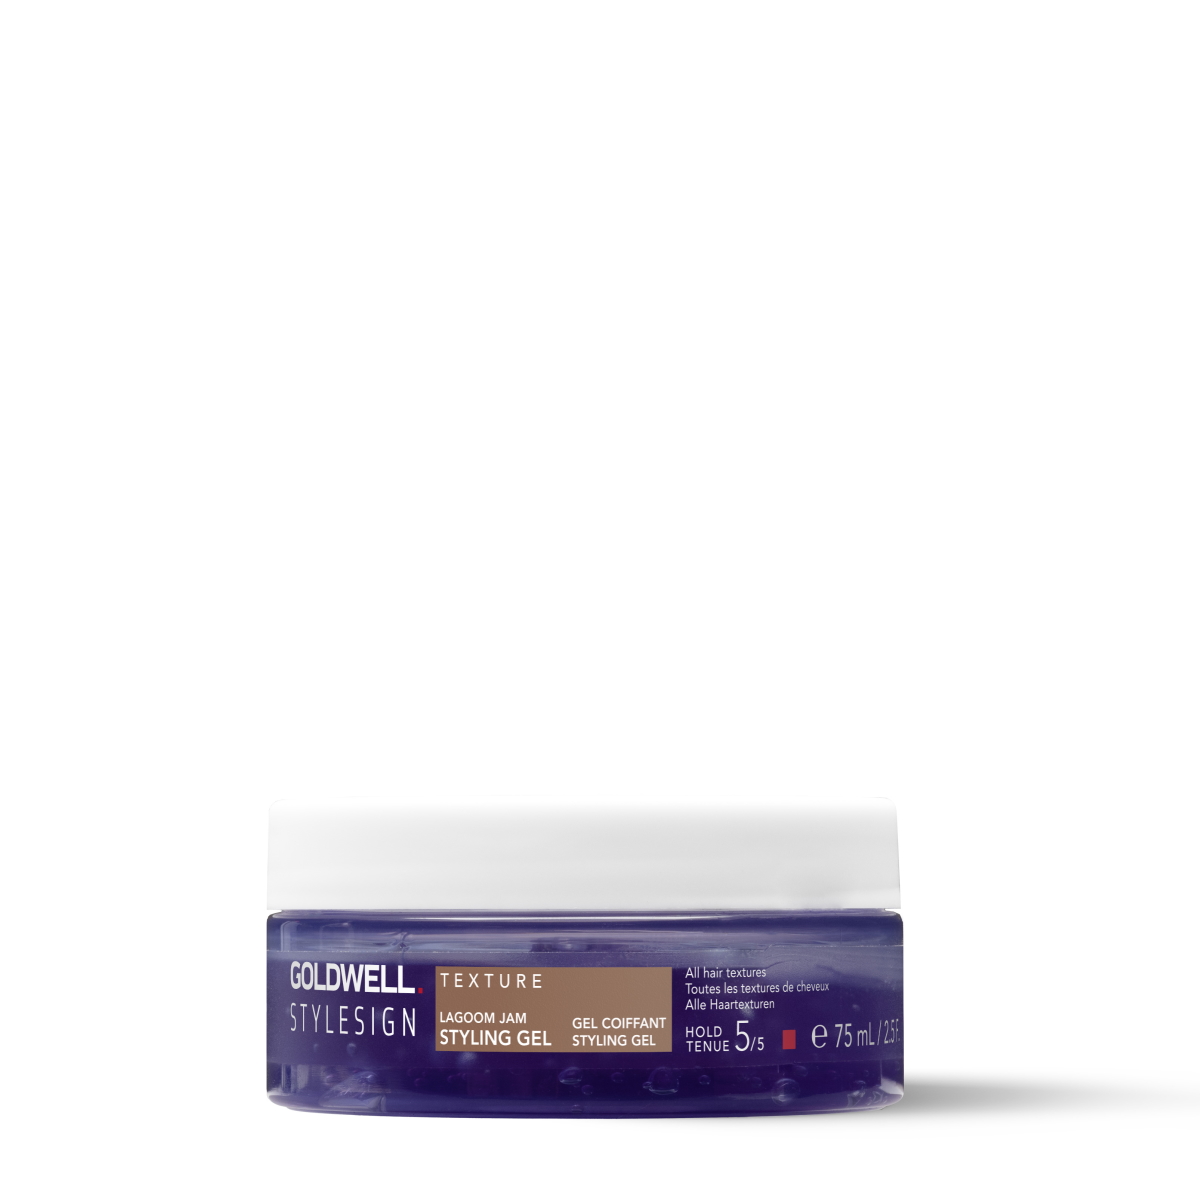 Goldwell Style Sign Texture Lagoom Jam Styling Gel 75ml